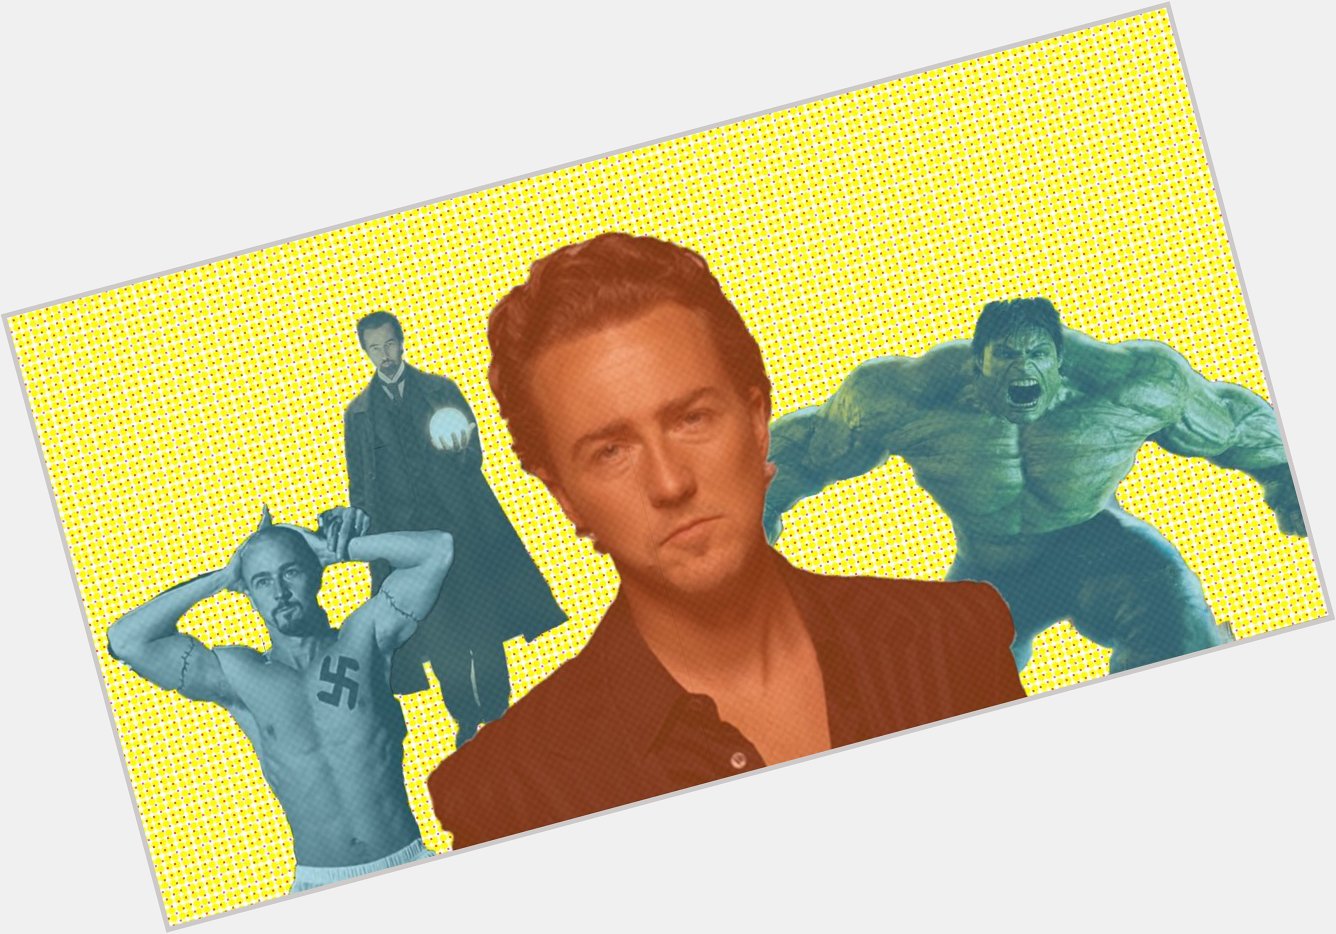 Happy Birthday Edward Norton! We love your work! What s your favorite movie he s acted in? 